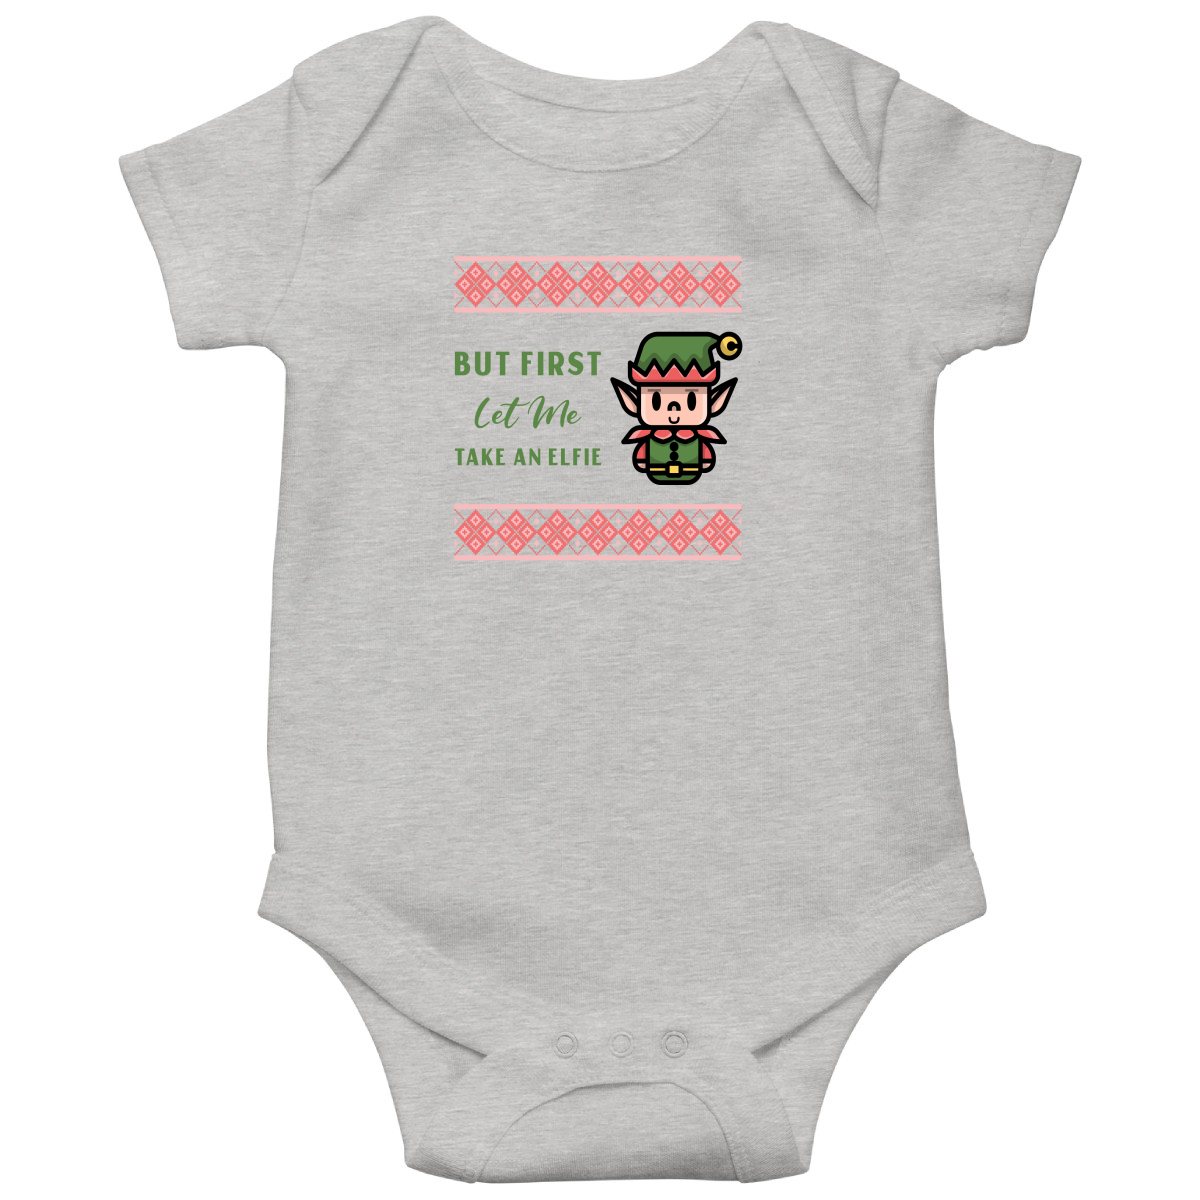 But First Let Me Take an Elfie Baby Bodysuits